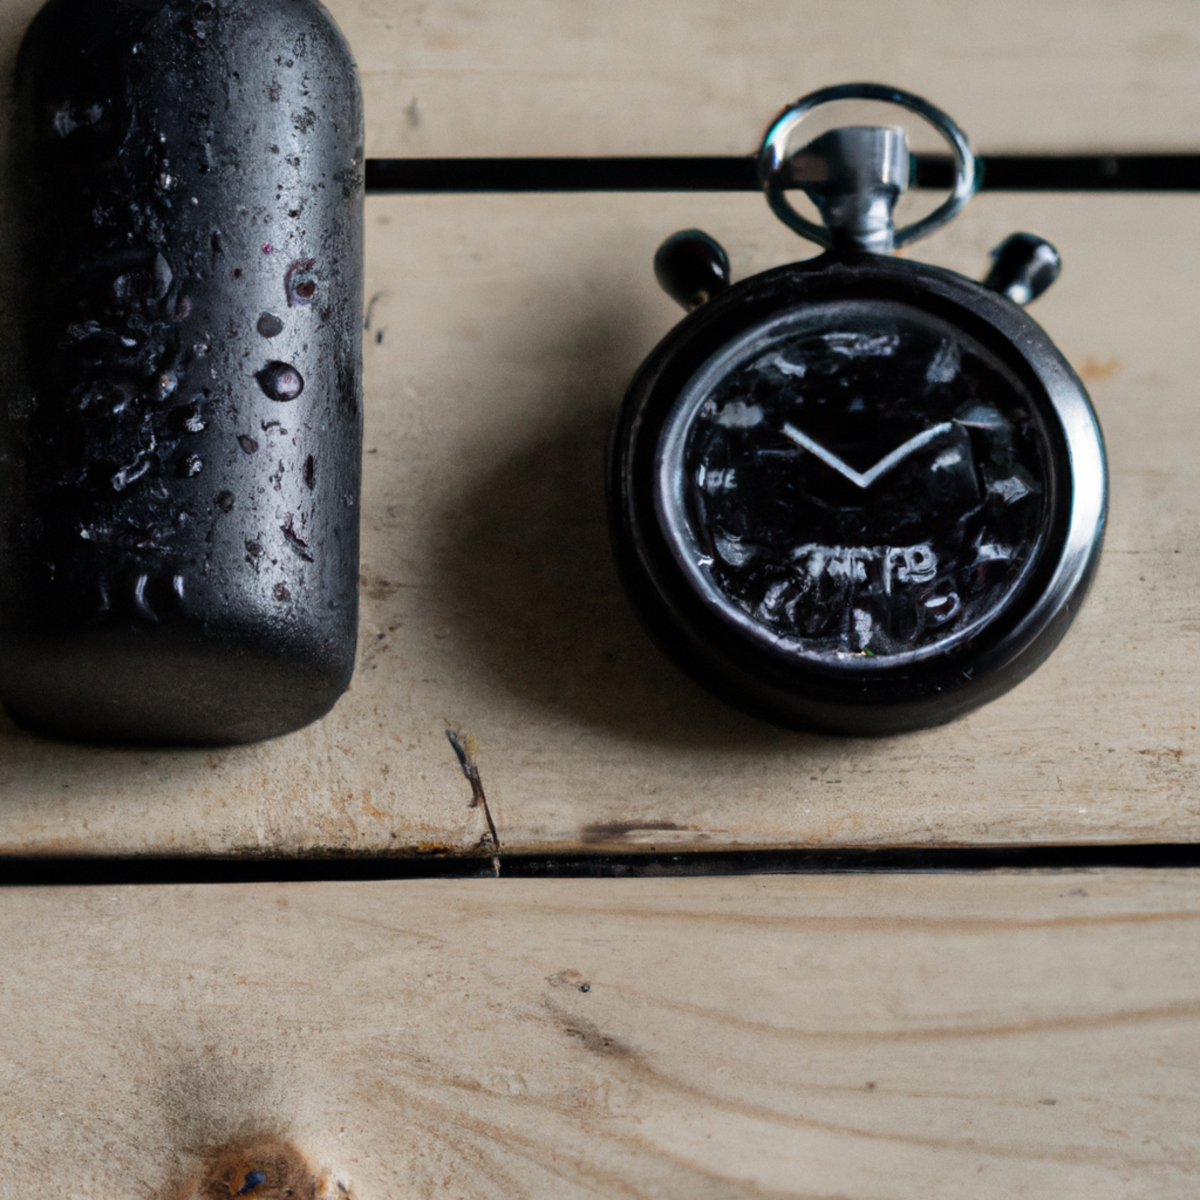 The photo captures a sleek black water bottle, a stopwatch, and a set of weights arranged neatly on a wooden floor. The water bottle is half-full, with droplets of condensation glistening on its surface. The stopwatch displays a time of 00:00, ready to be used for timing workouts. The weights are evenly spaced, with the largest one in the center, and appear to be waiting for someone to pick them up and start lifting. The lighting is bright and natural, casting a warm glow on the objects and highlighting their textures. The composition of the photo is simple yet effective, conveying the idea of fitness and discipline through the carefully chosen objects.